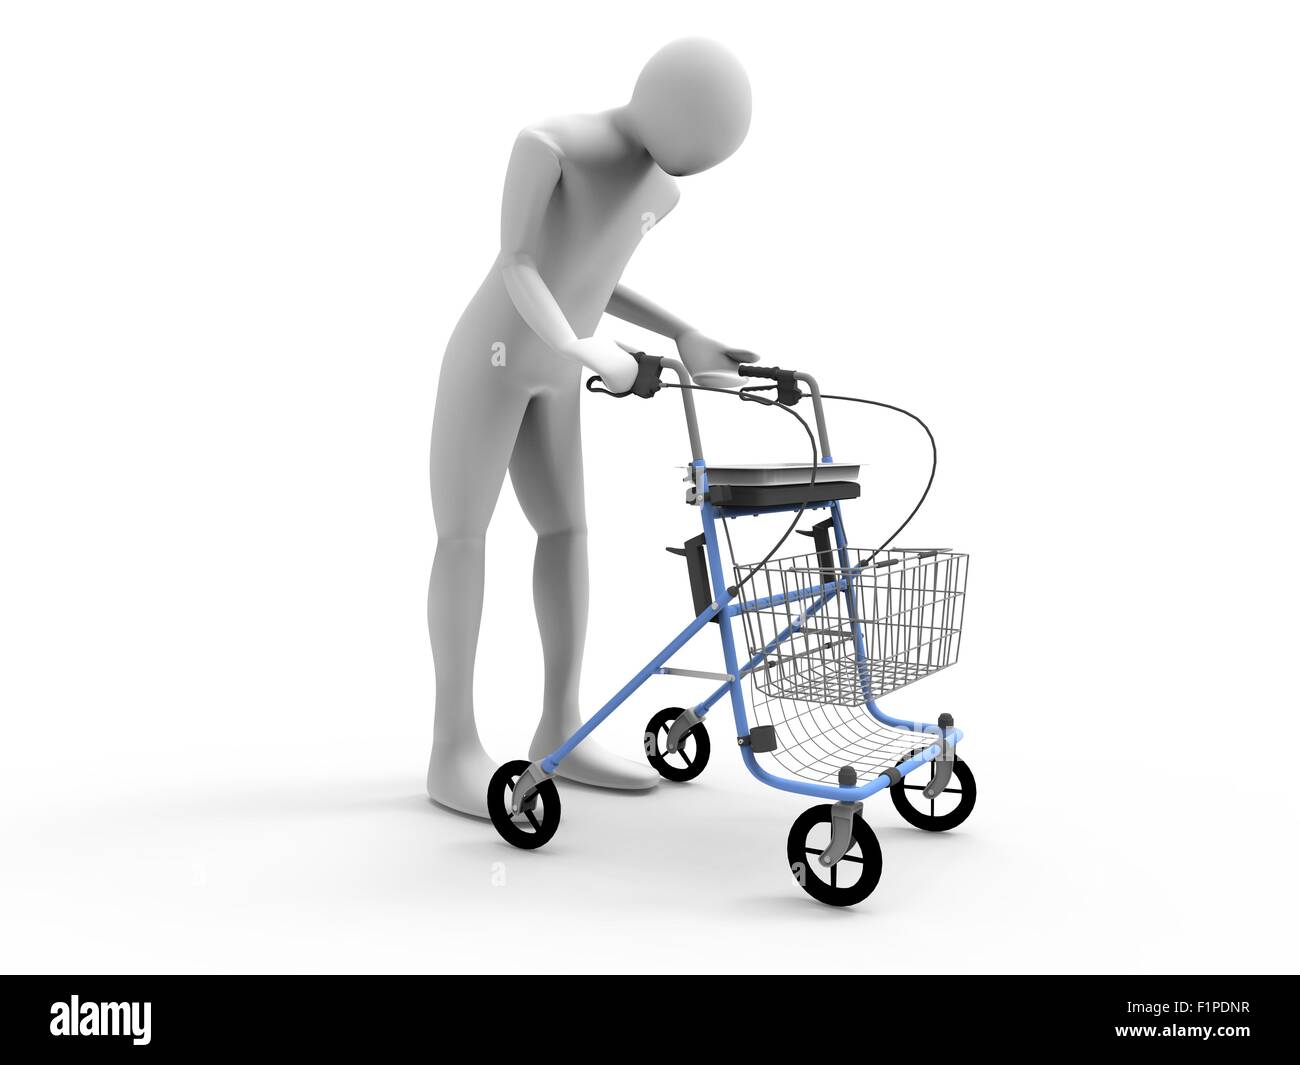 3D man with walking frame/rollator Stock Photo